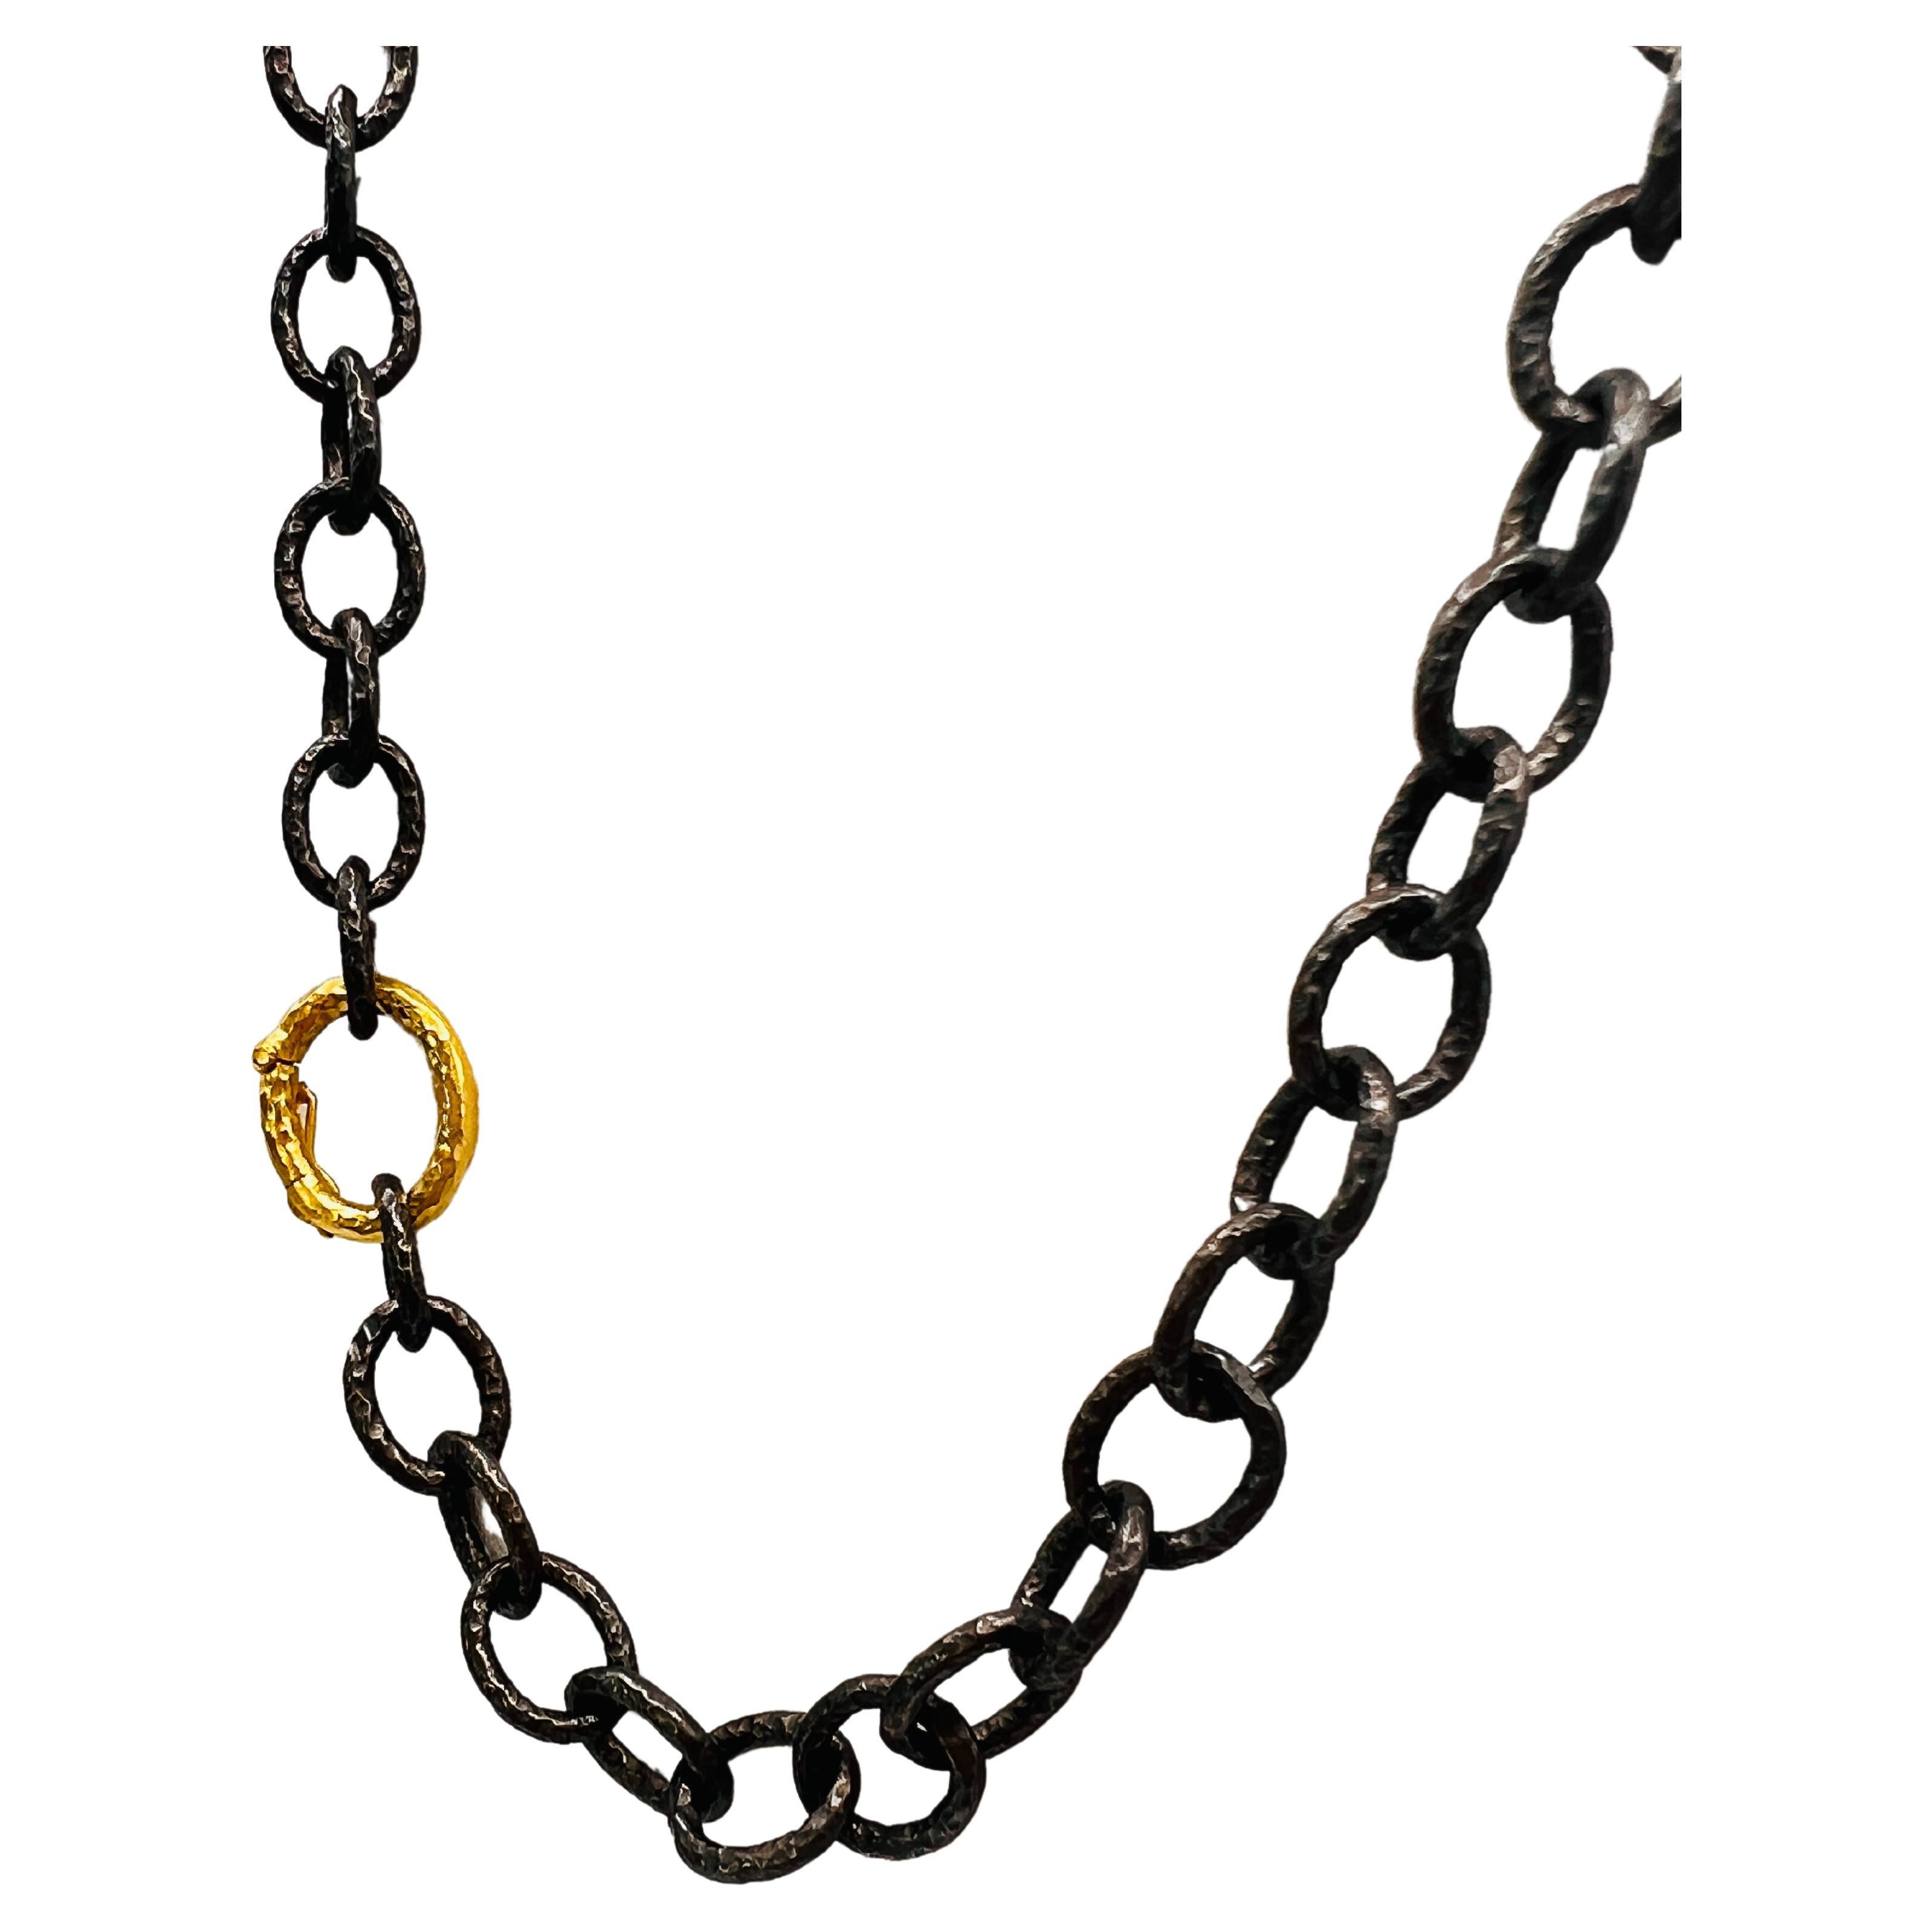 Blackened Silver Thick Chain with 20K Gold Clasp, by Tagili For Sale